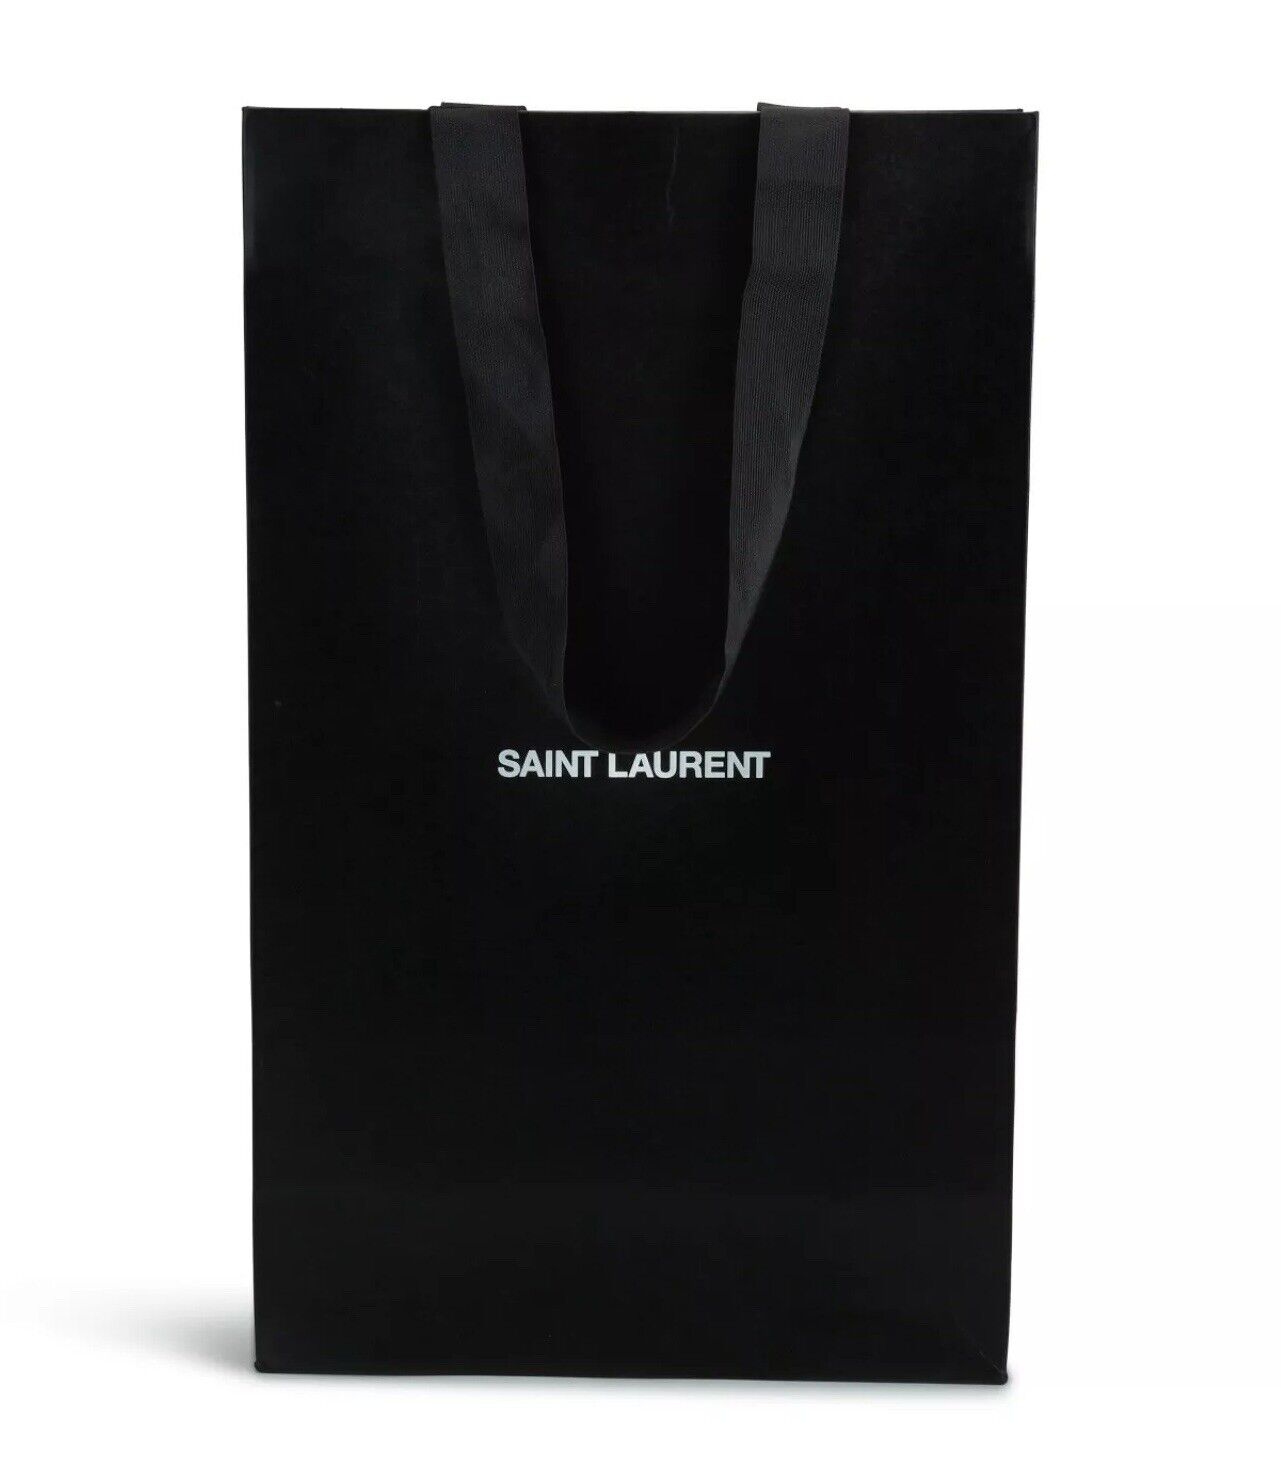 BRAND NEW Authentic Saint Laurent YSL Shopping Gift Tote Bag 12.5 x 20.5 x  5.75